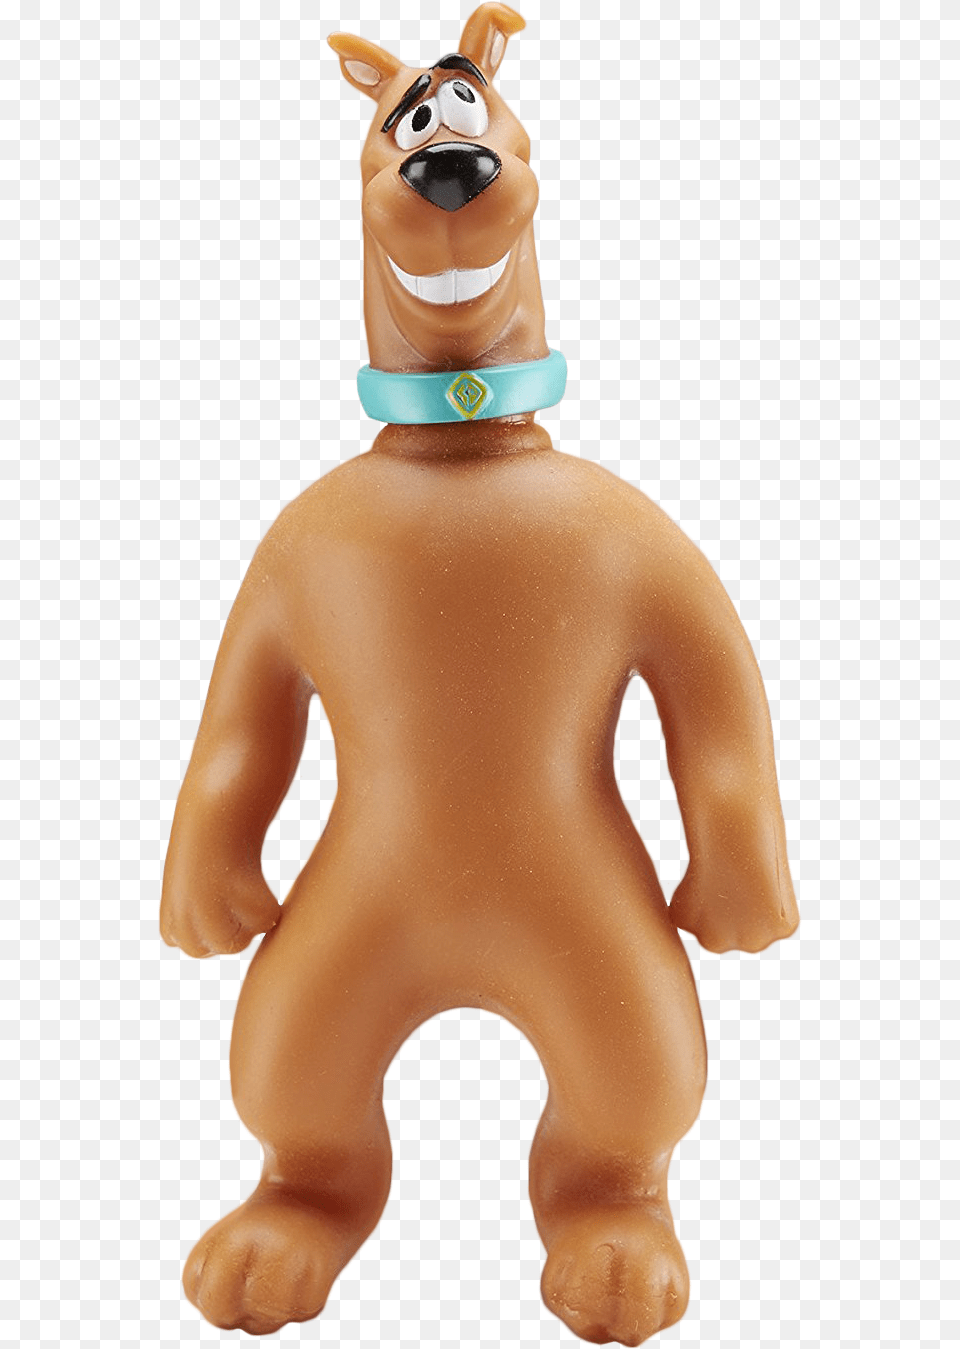 Imagens De Scooby Doo Scooby Doo Stretch Toy, Figurine, Food, Sweets, Baby Free Png